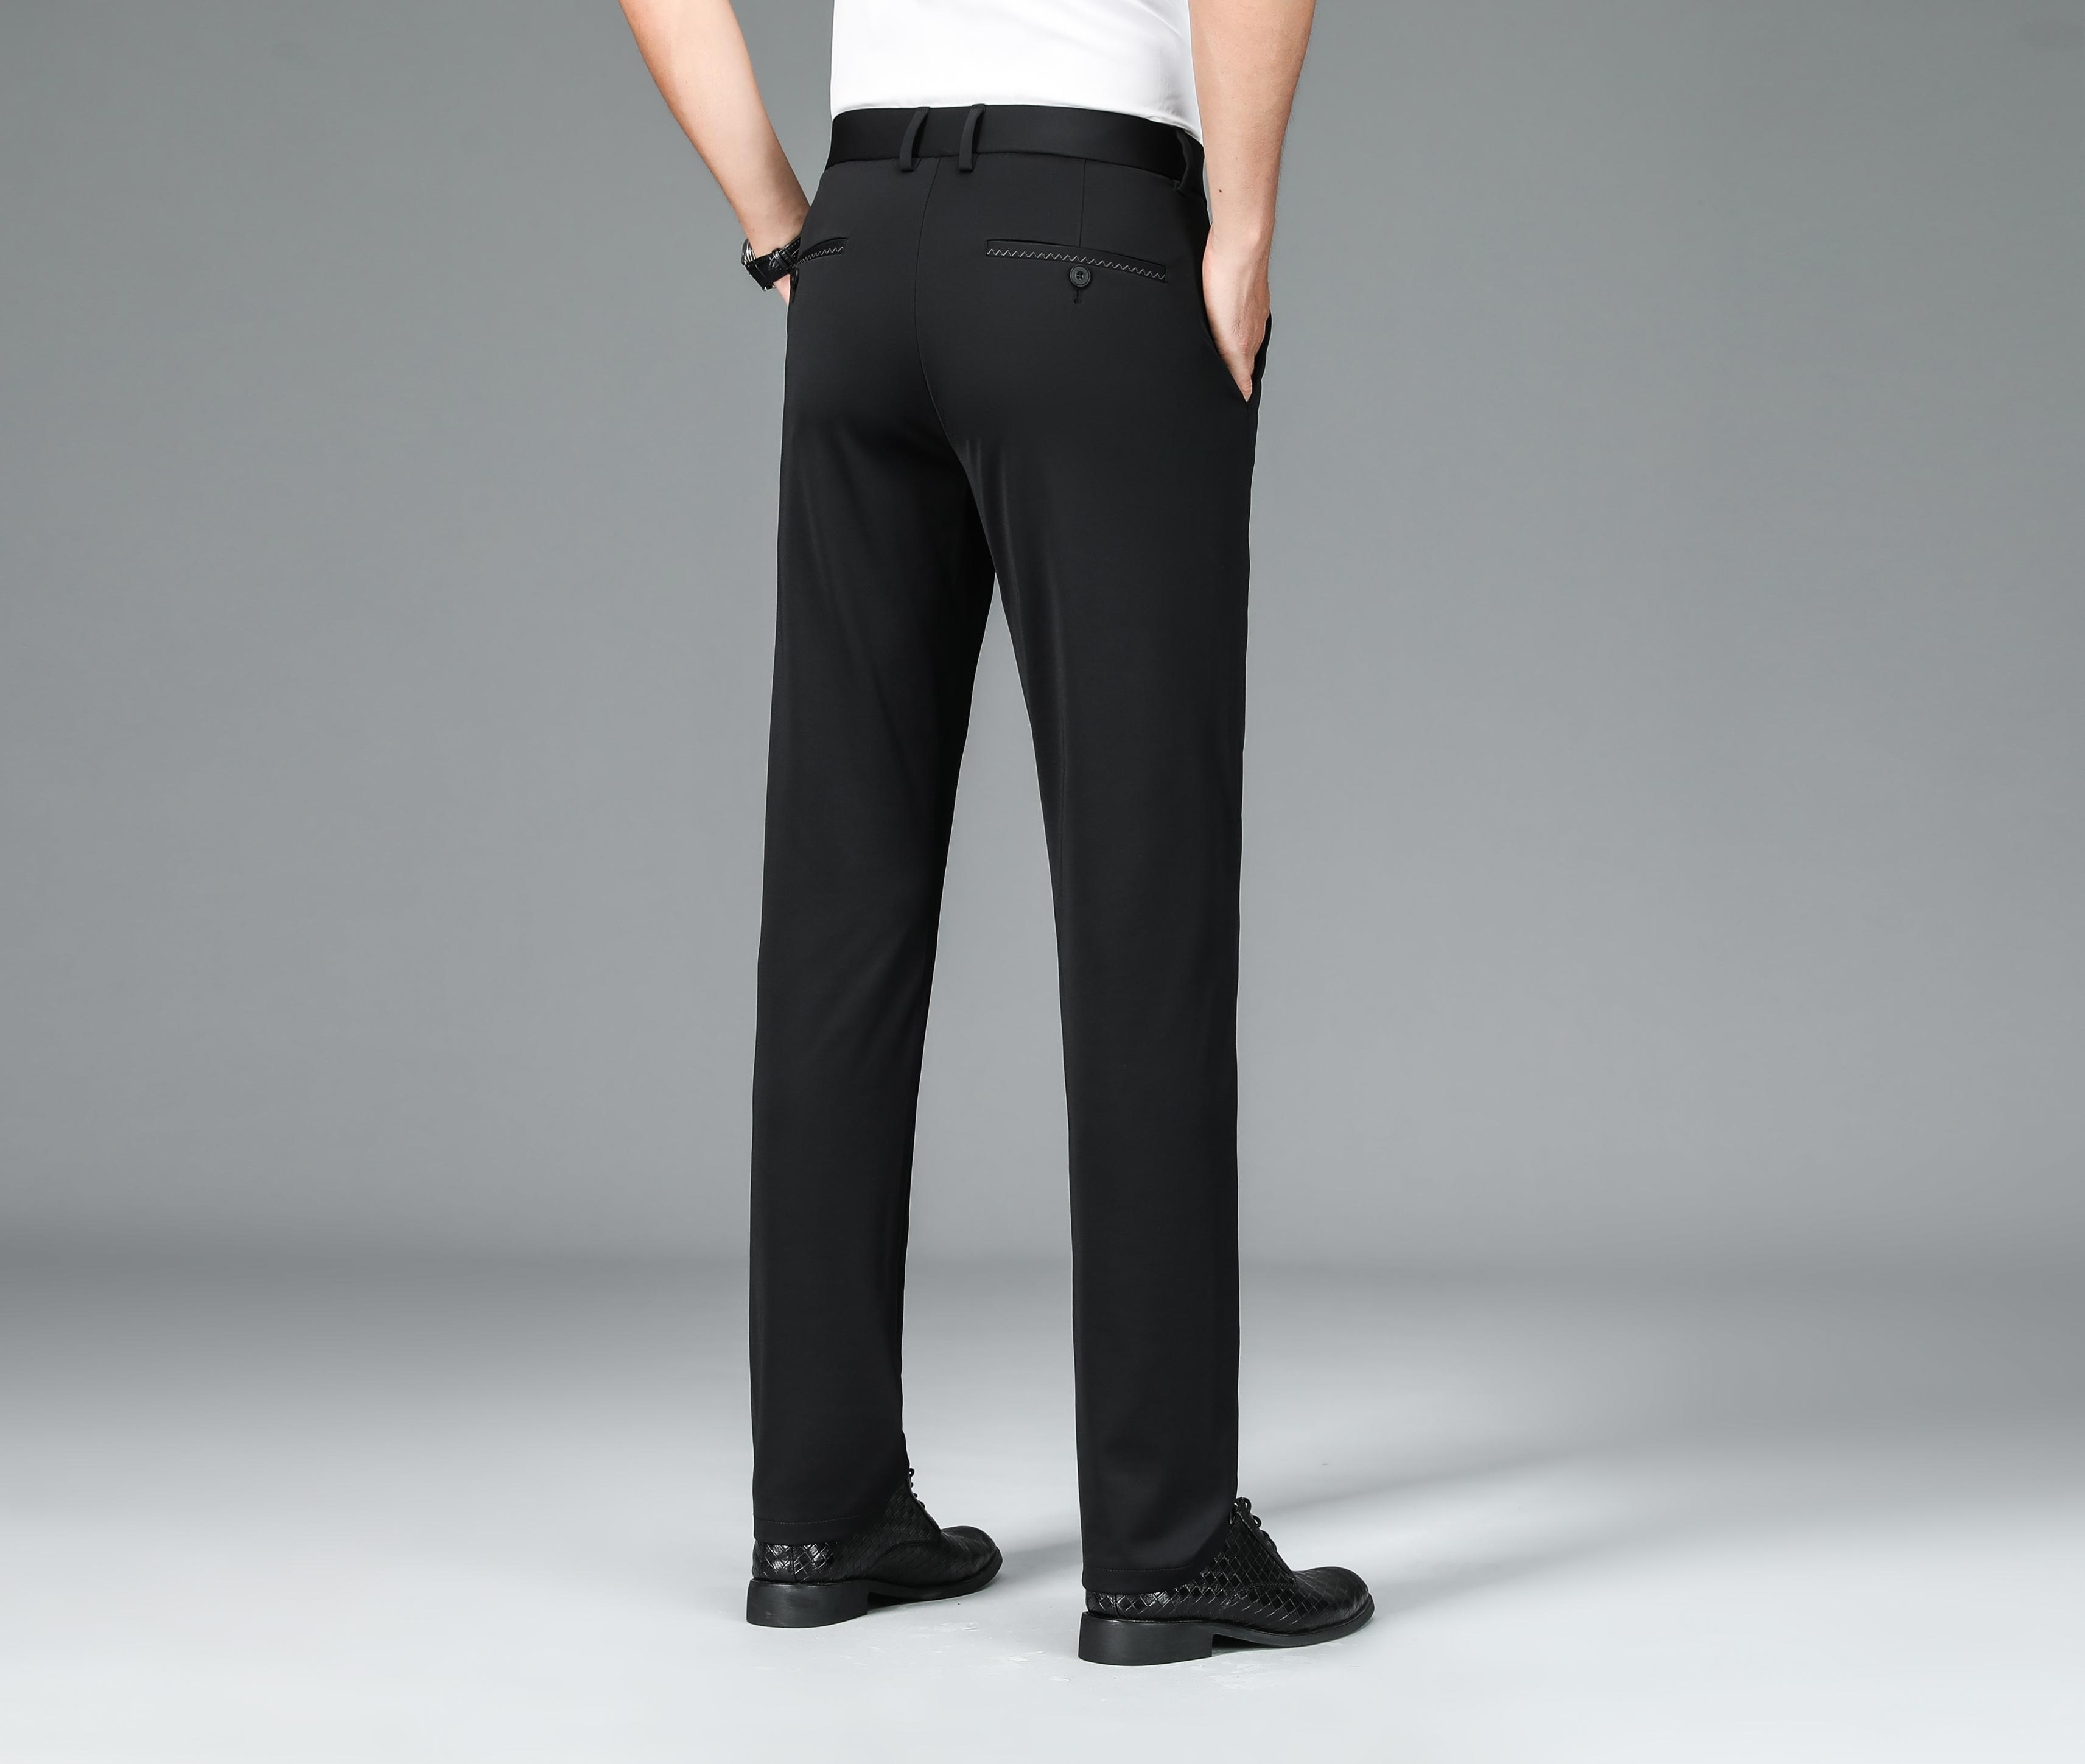 Women Business Casual Trousers Straight Thin Office Formal Elastic